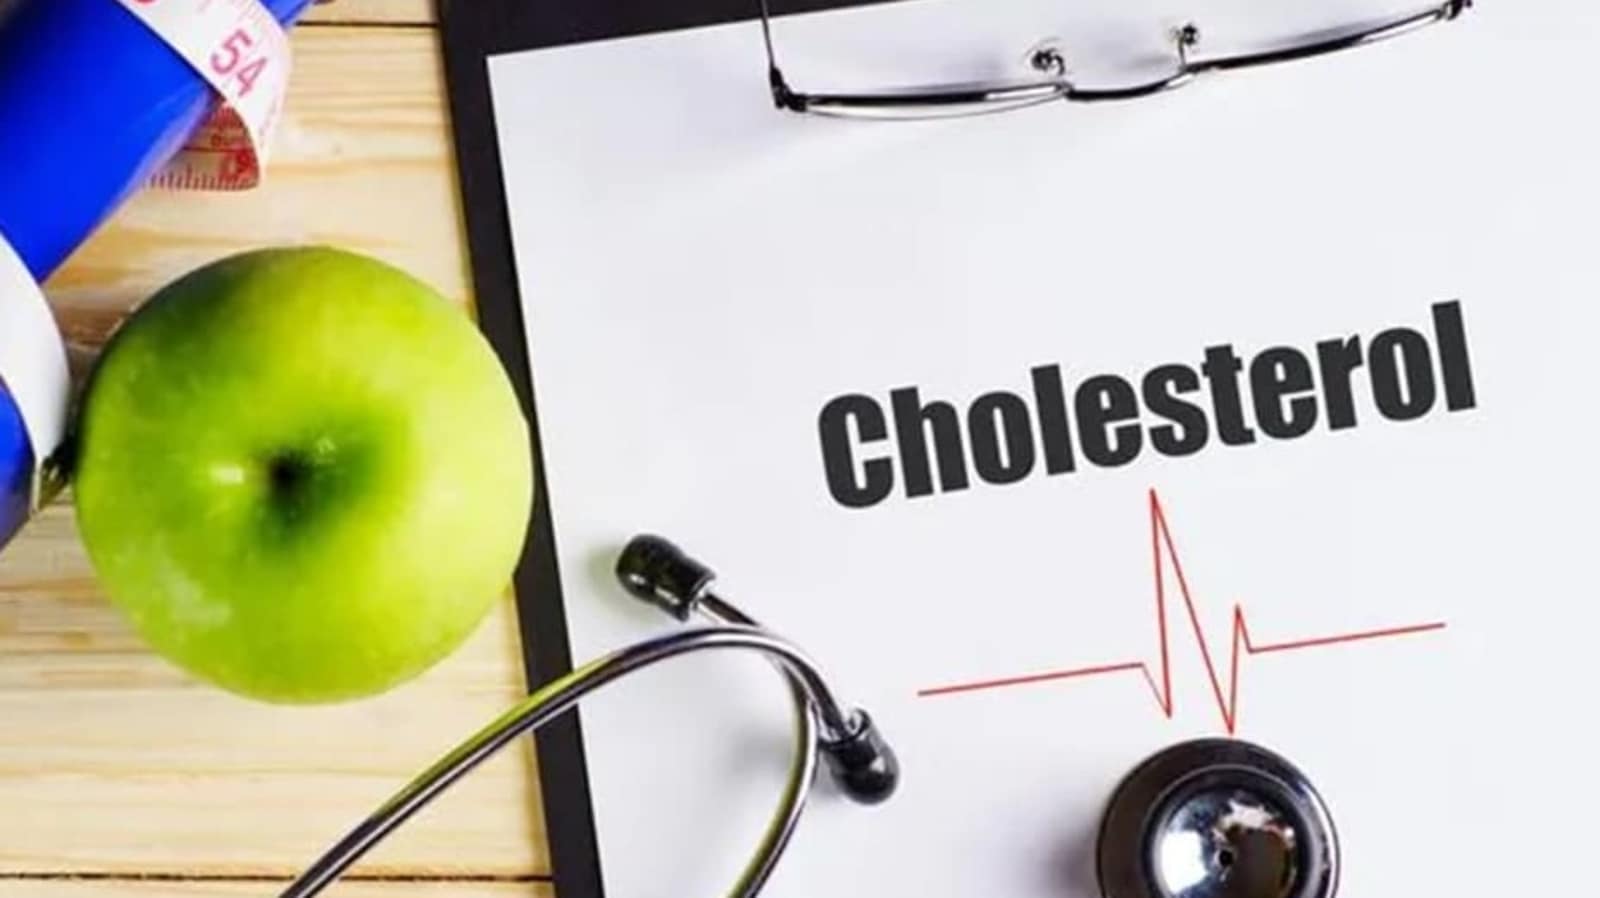 high-cholesterol-is-it-really-deadly-for-heart-nutritionist-busts-common-myths